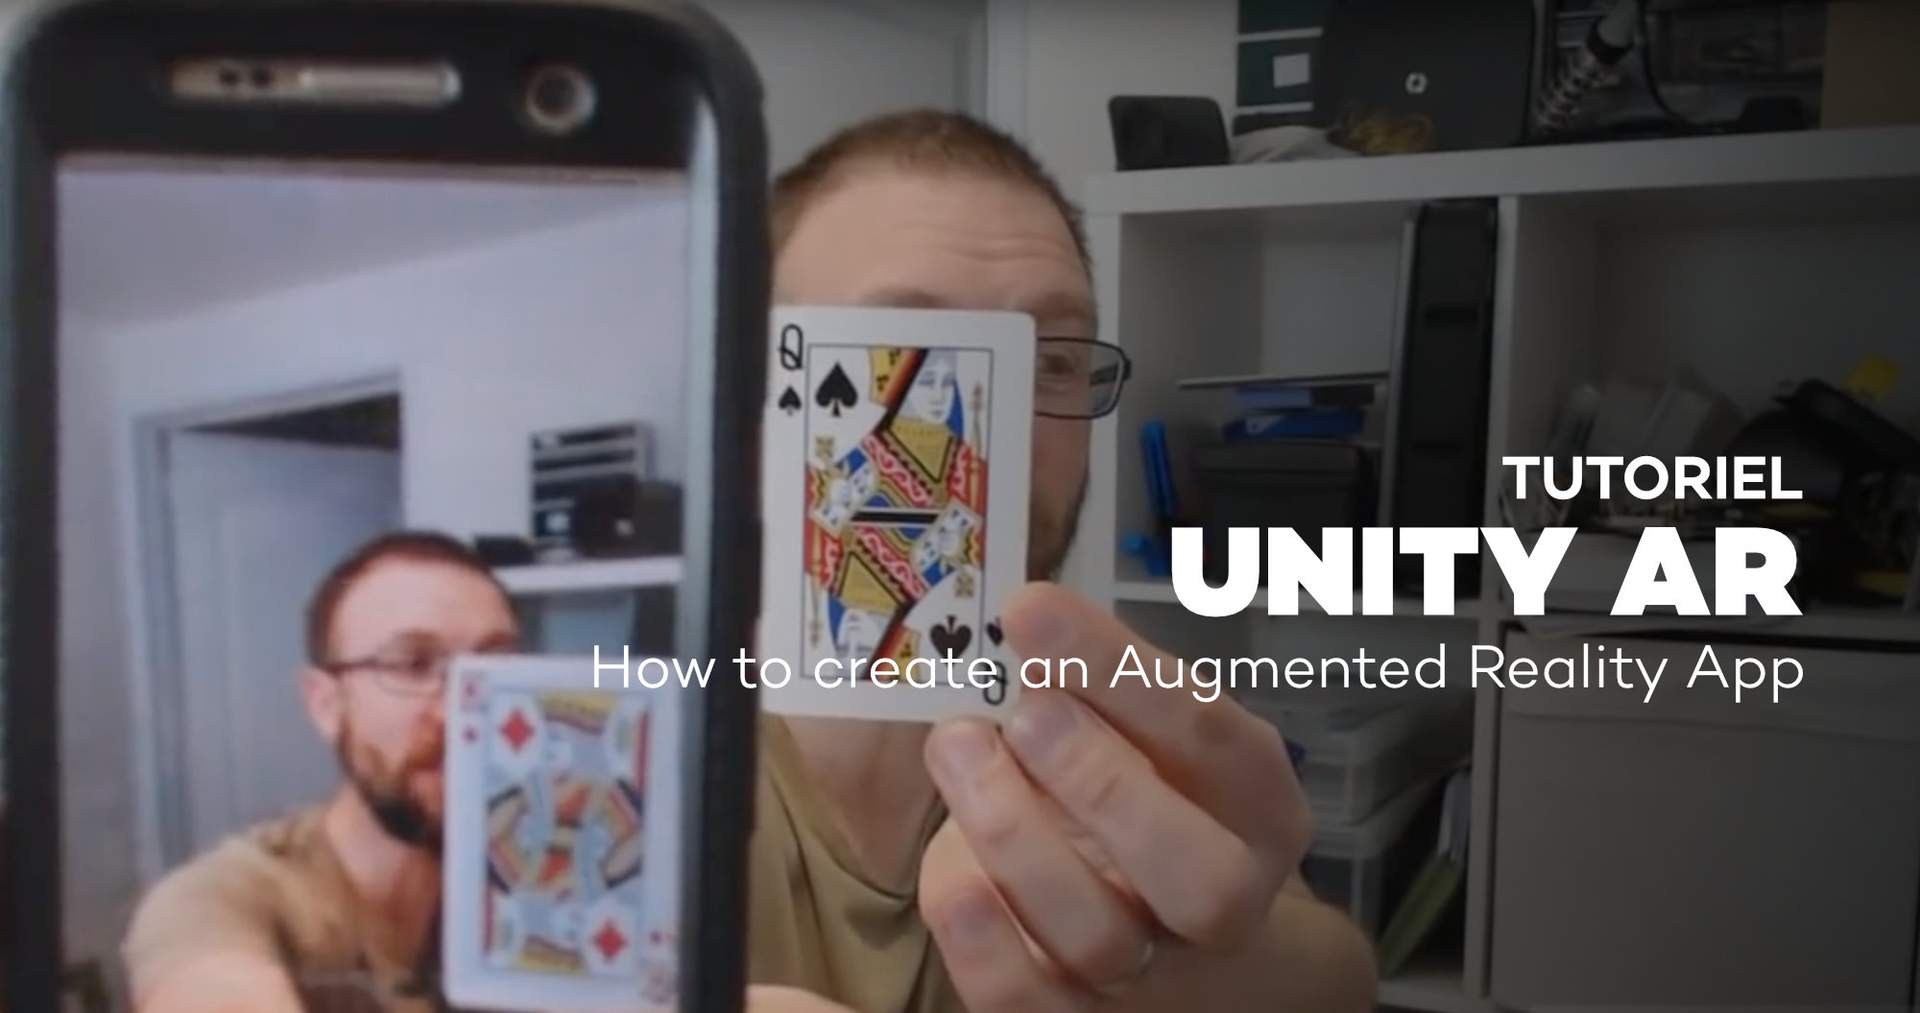 How to create an Augmented Reality App